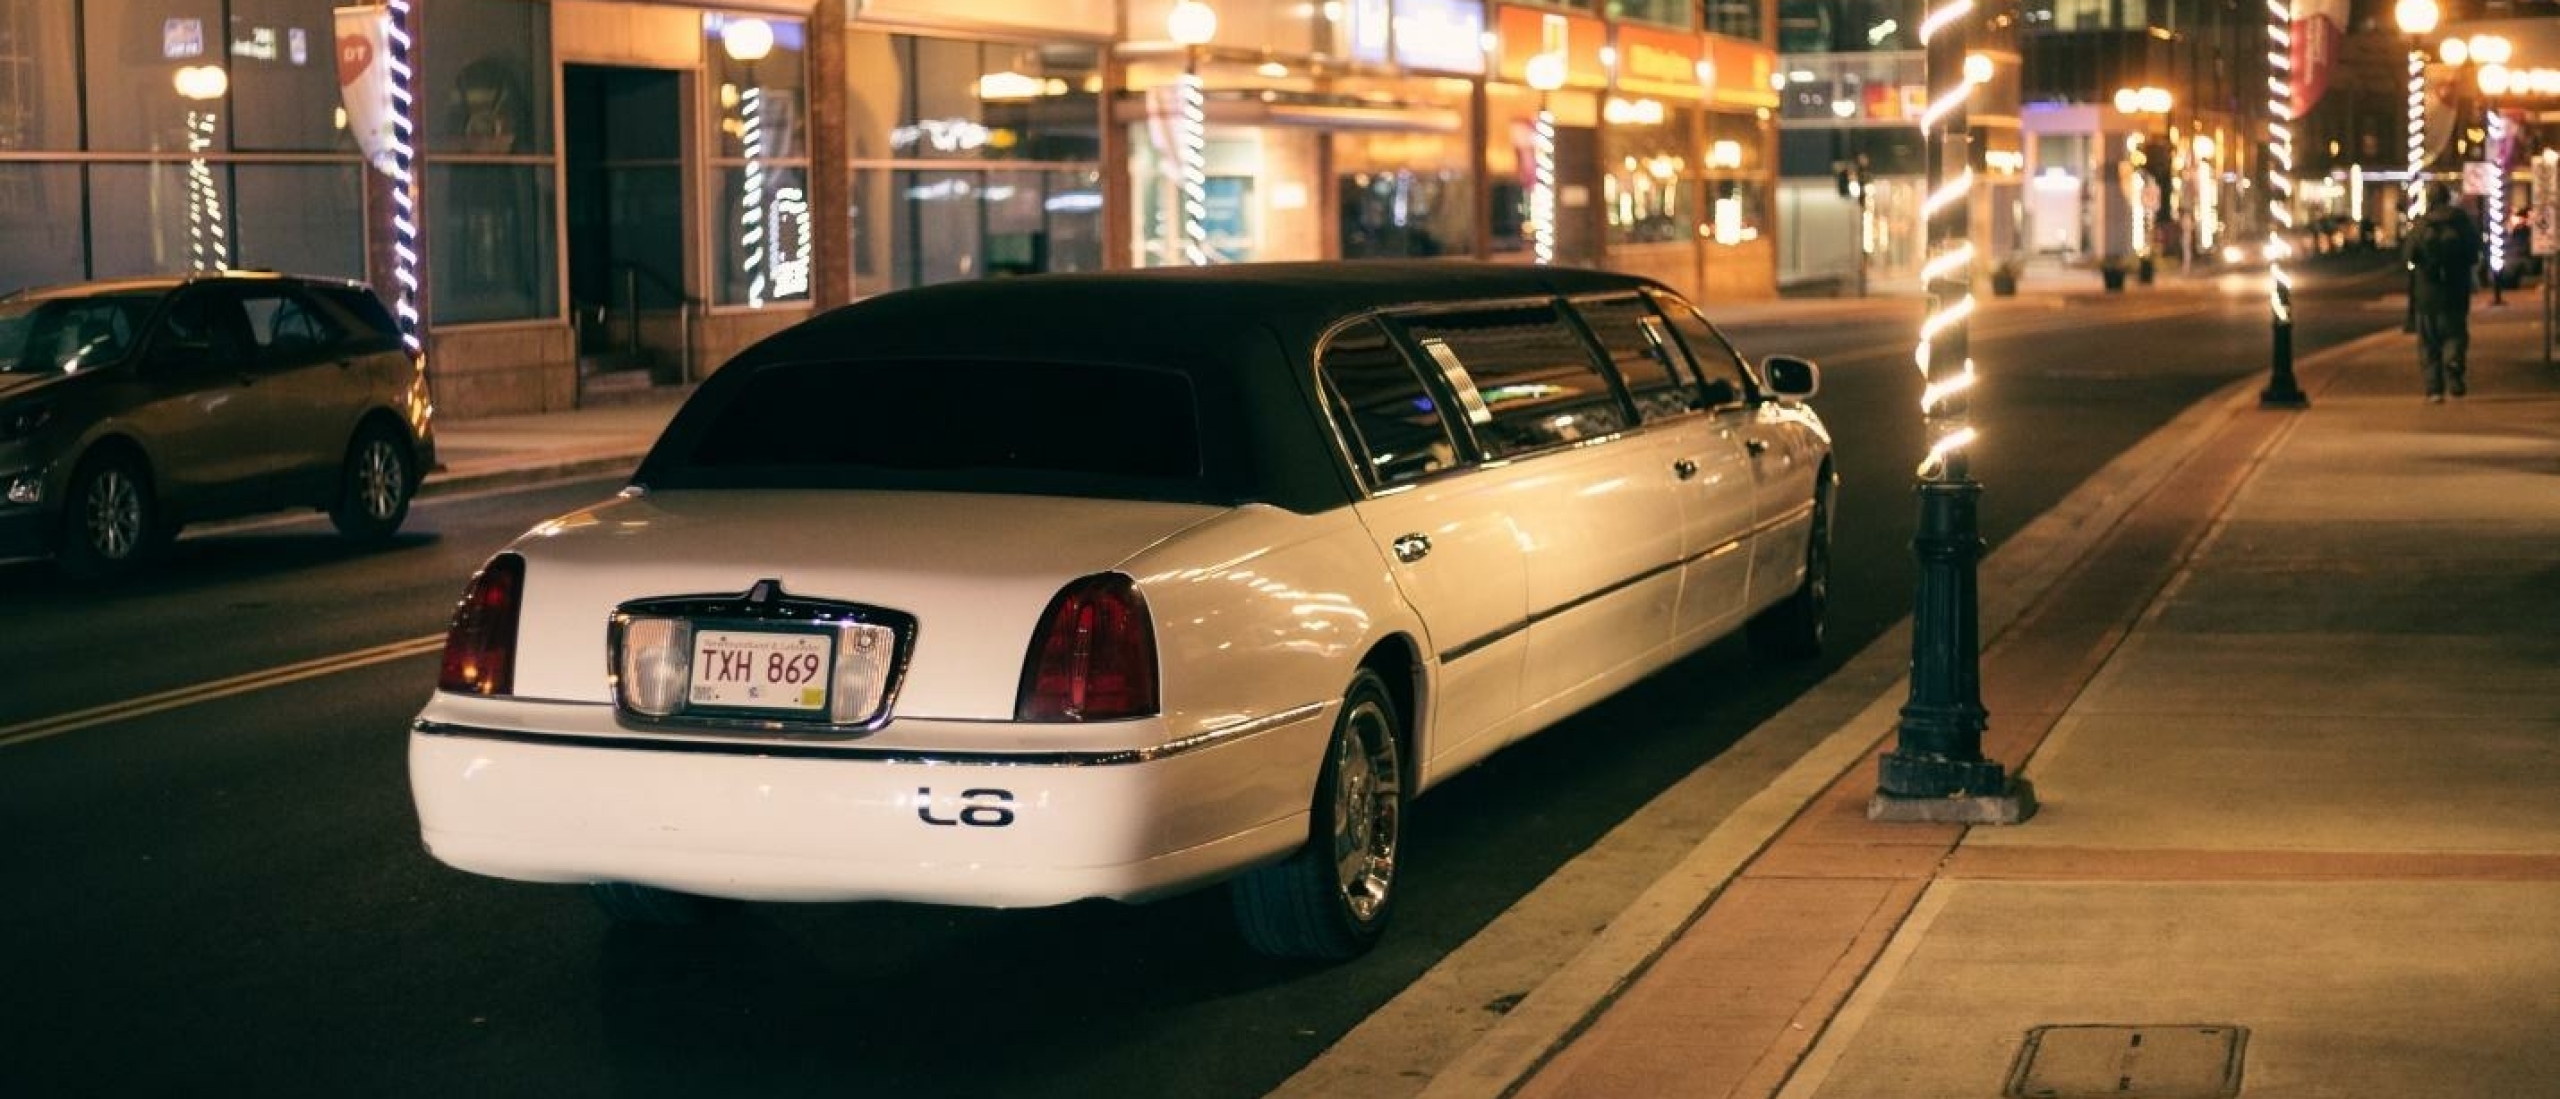 6 Reasons To Hire a Chauffeur For Your Special Event